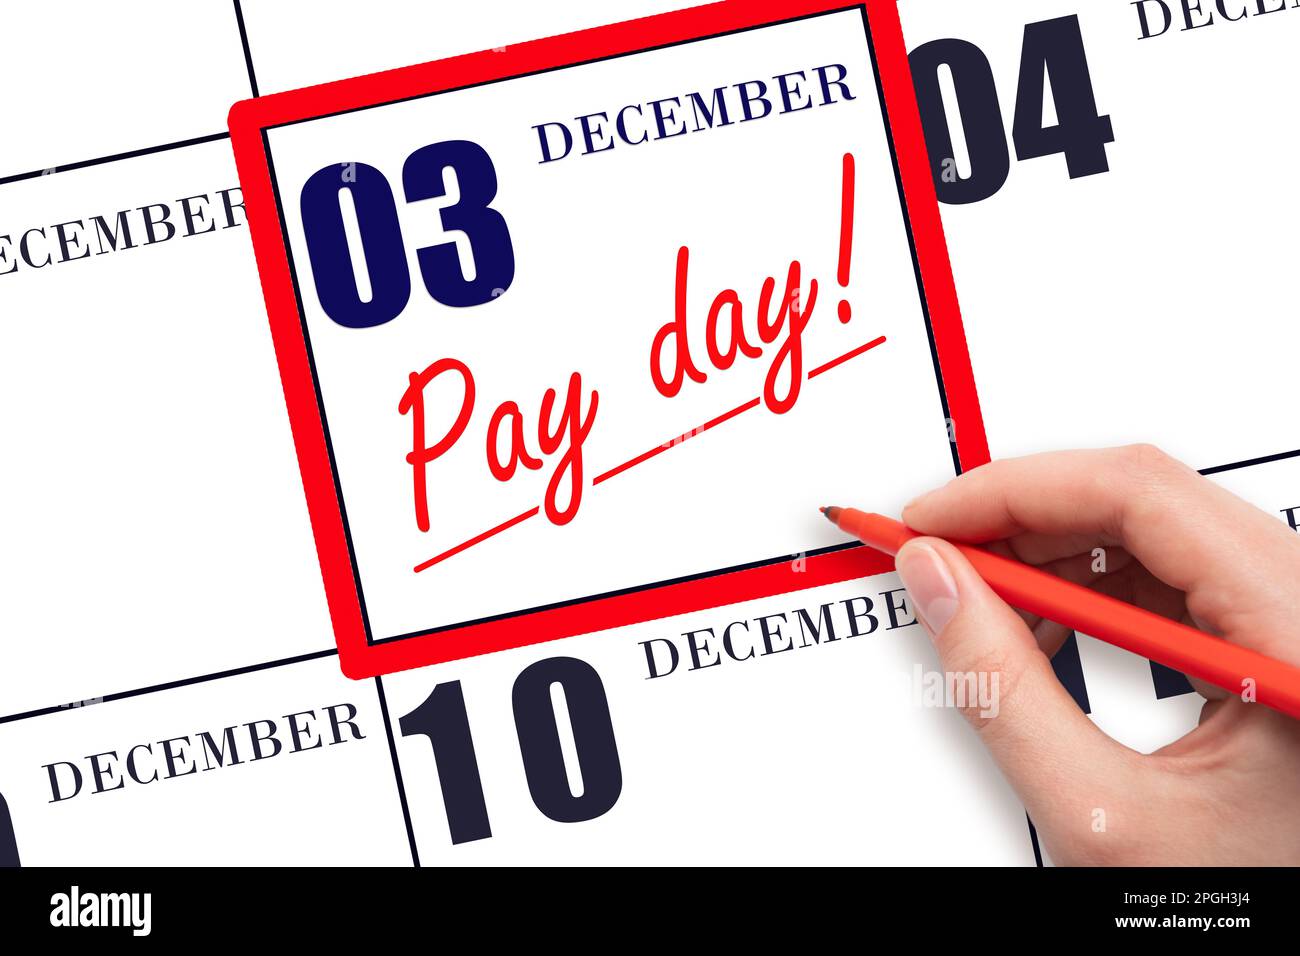 3rd day of December. Hand writing text PAY DATE on calendar date December 3 and underline it. Payment due date. Reminder concept of payment. Winter mo Stock Photo